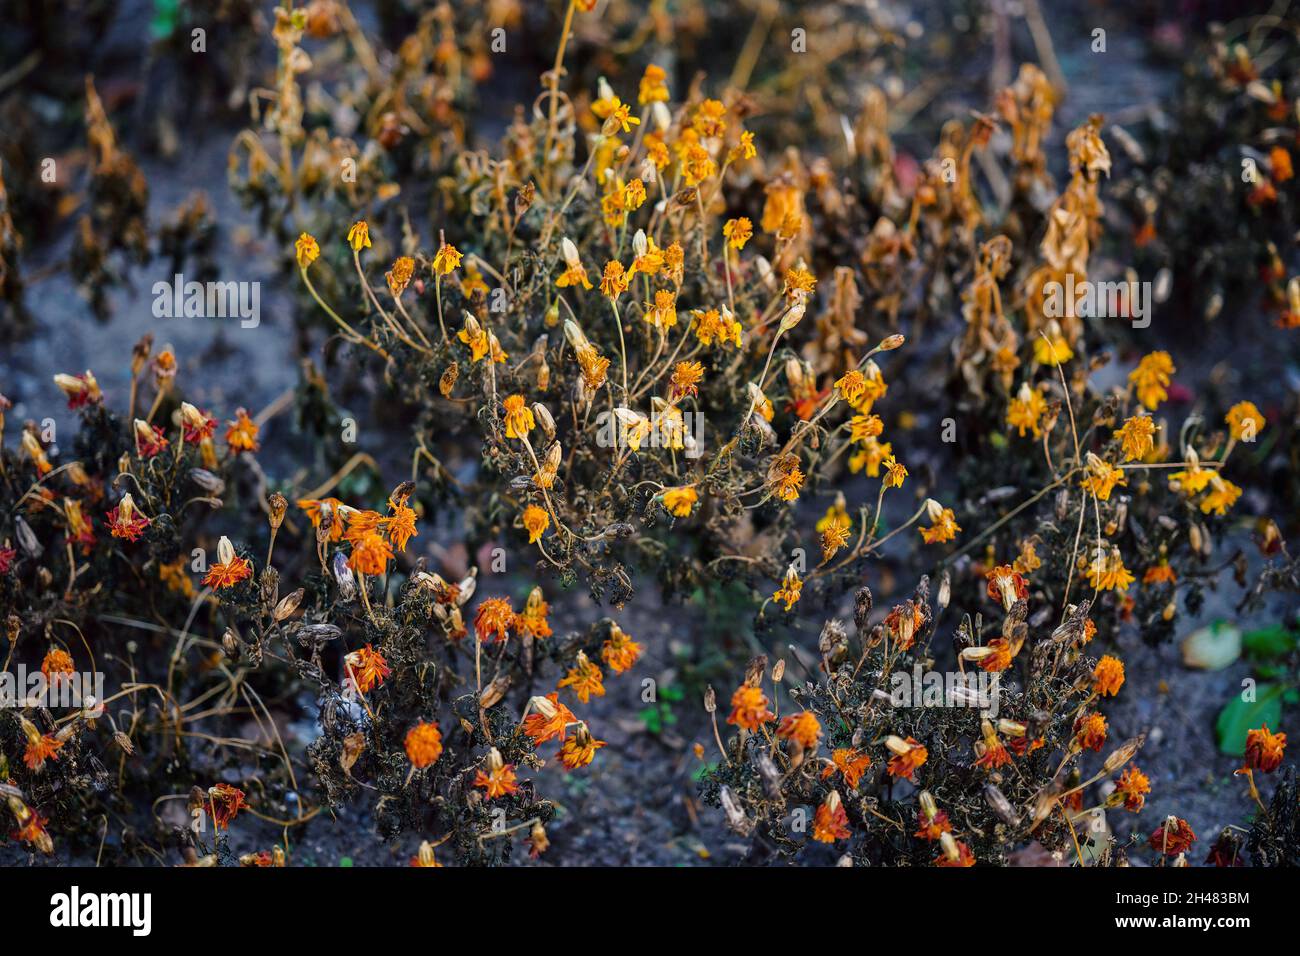 Withered flowers (Marigolds). In the autumn garden at sunset. Selective focus with shallow depth of field. Stock Photo